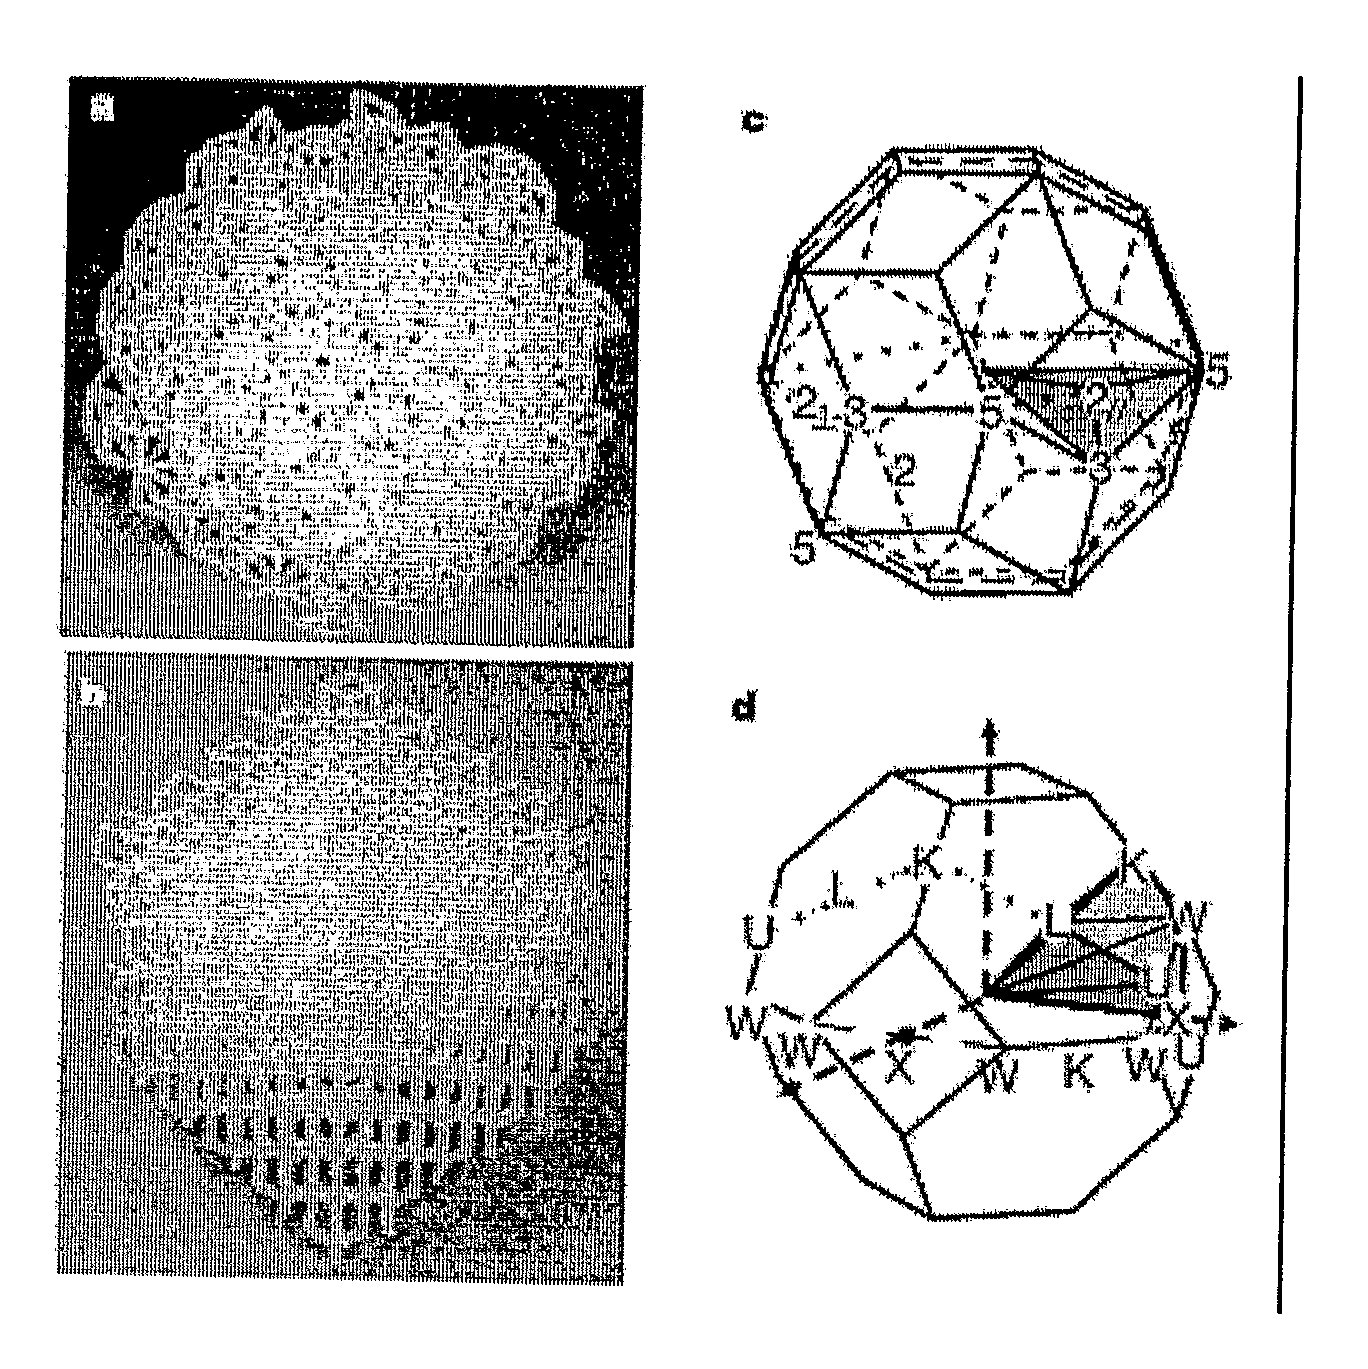 Quasicrystalline structures and uses thereof